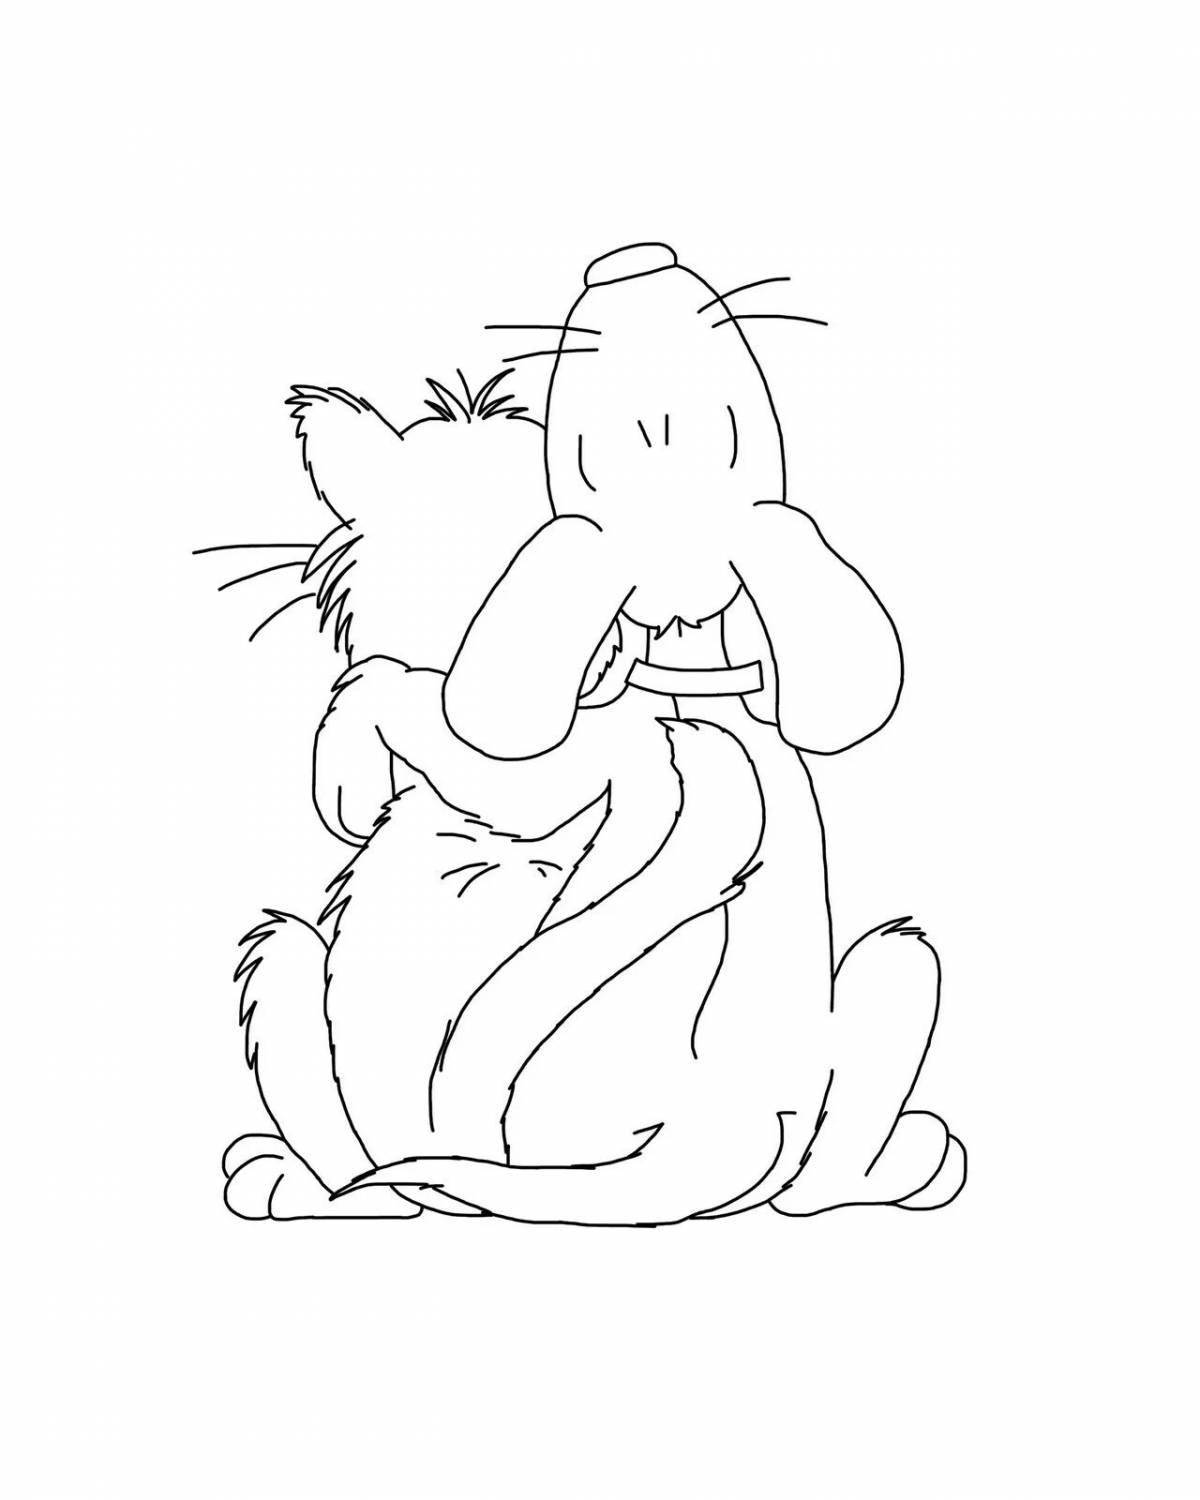 Caring hugs coloring pages